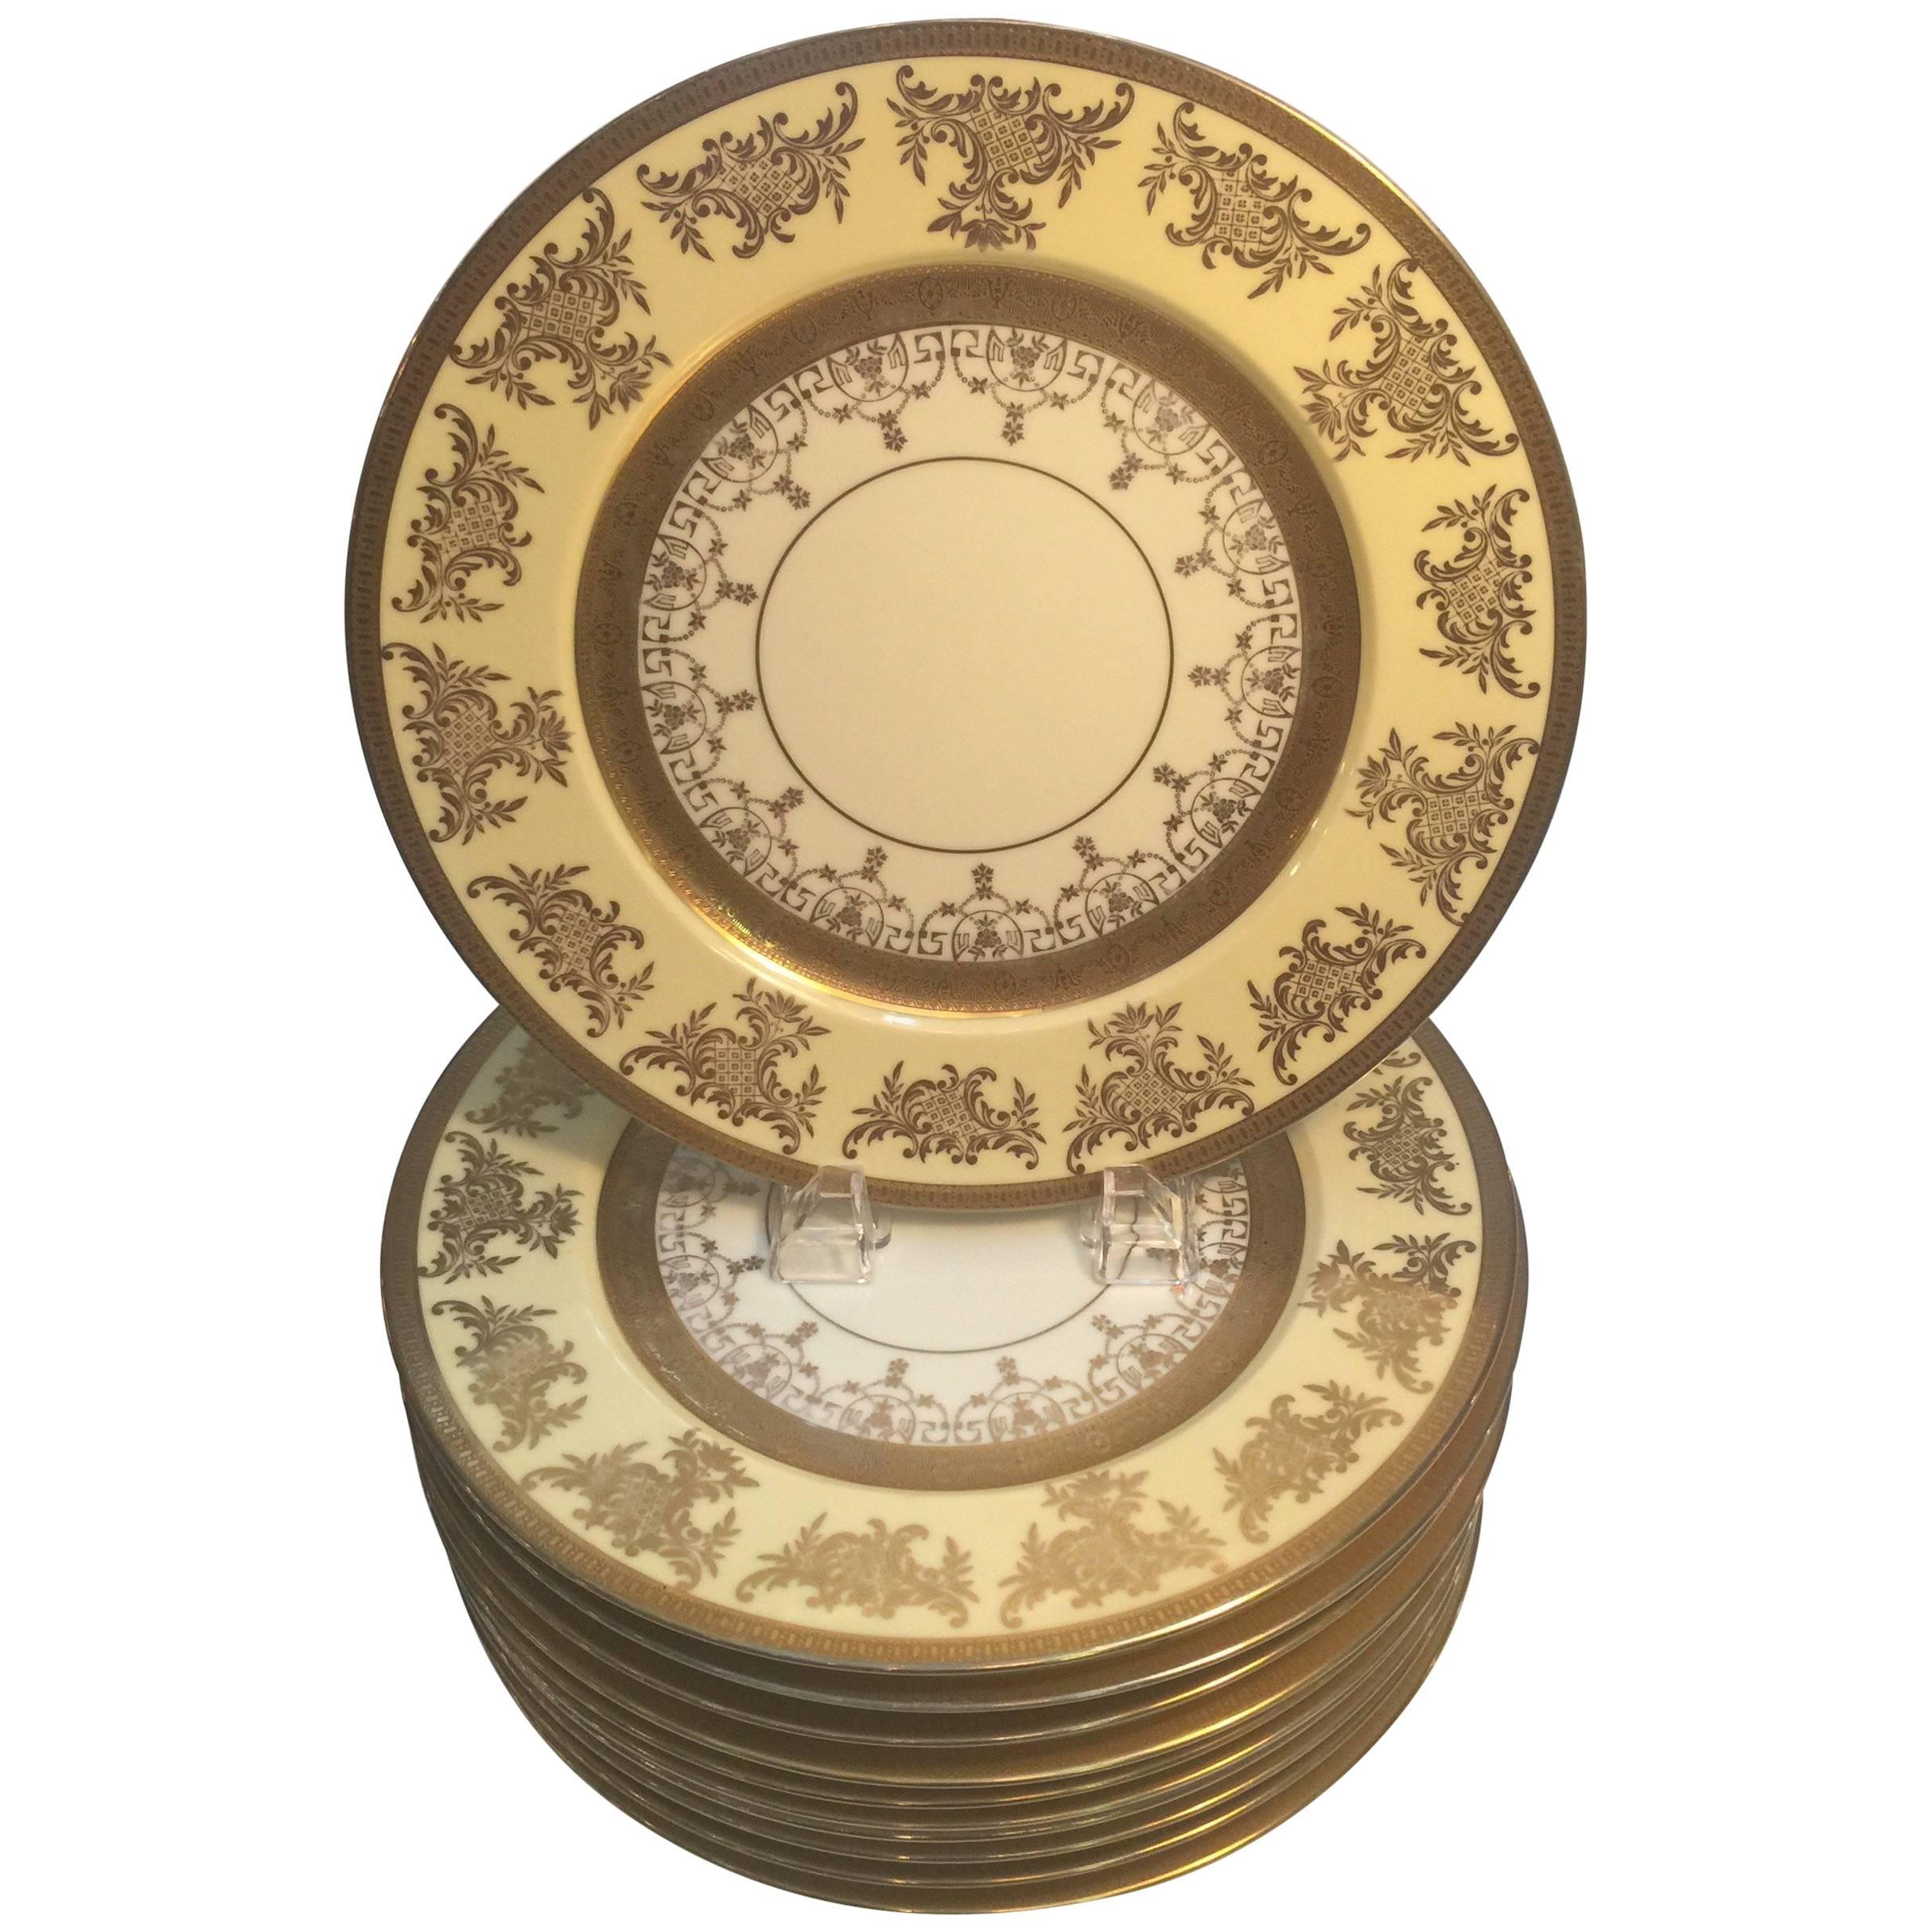 Set of 12 Service Dinner Plates with Vanilla and Gilt Borders